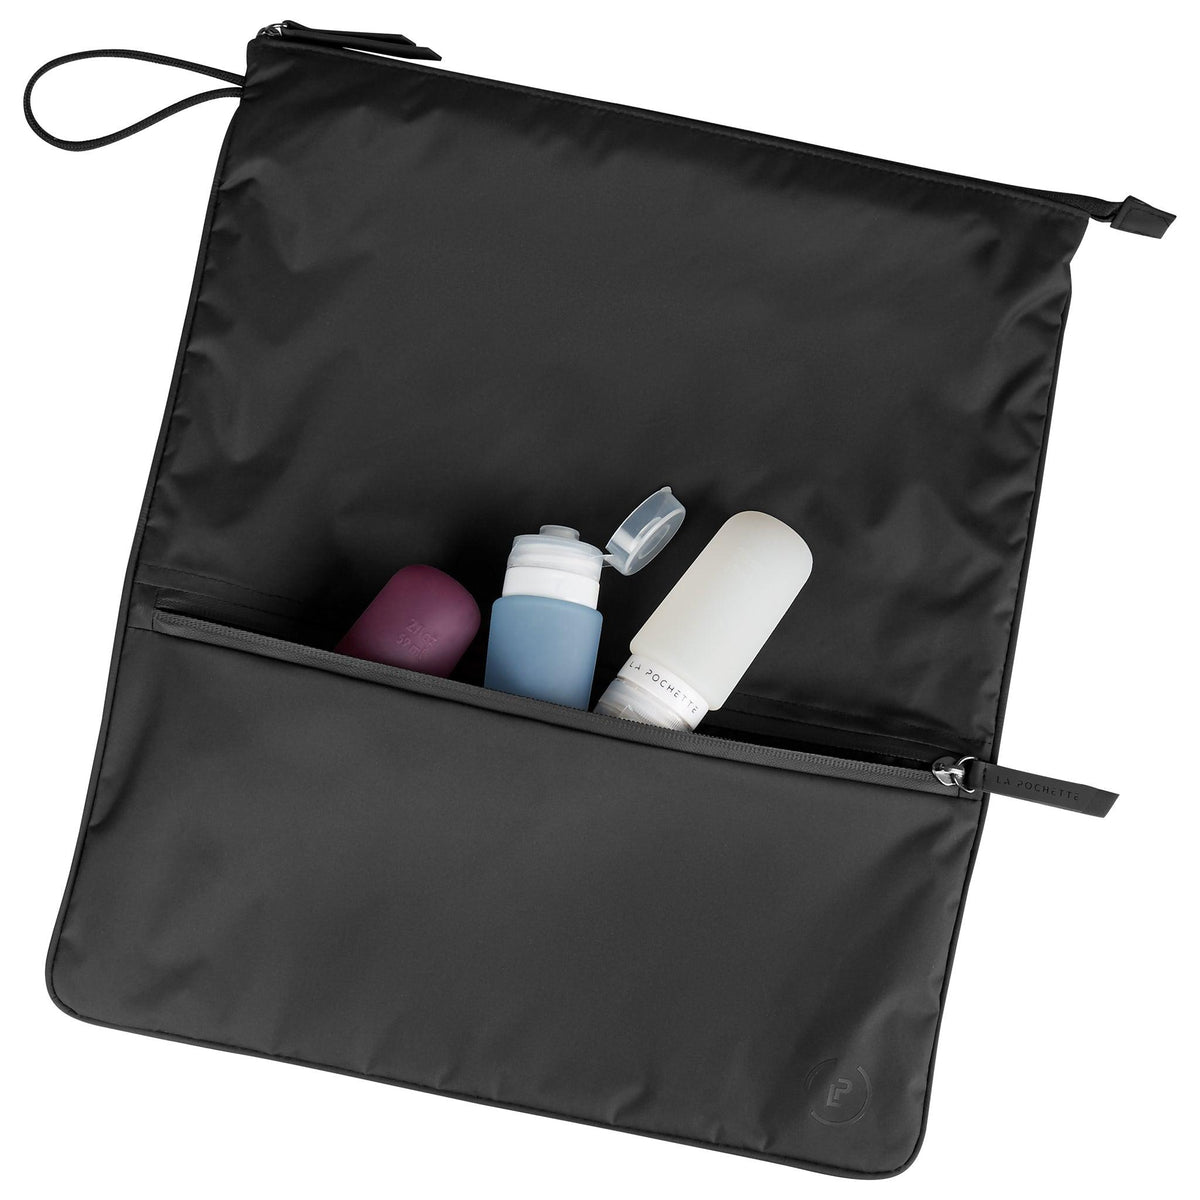 Ink Sweat Bag laid flat, topped with a small La Pochette Anywhere Everything Bag holding La Pochette silicone travel bottles.